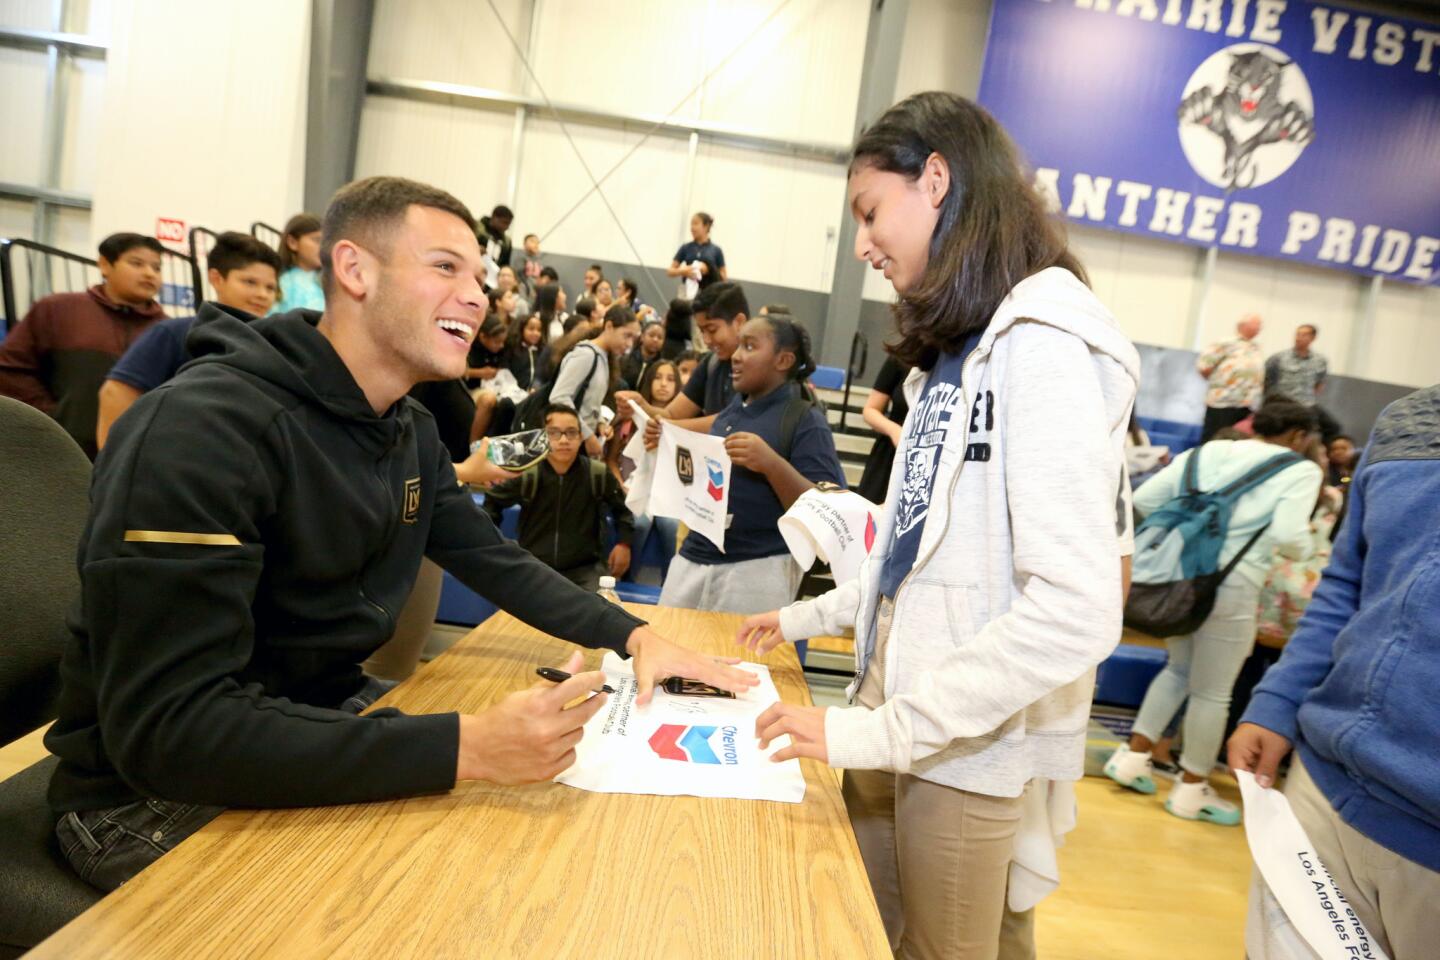 LAFC Player Christian Ramirez Surprises Students at Prairie Vista Middle School During Chevron's Fuel Your School Event on Monday, Oct. 22, 2018 in Hawthorne, Calif. (Casey Rodgers/AP Images for Chevron)